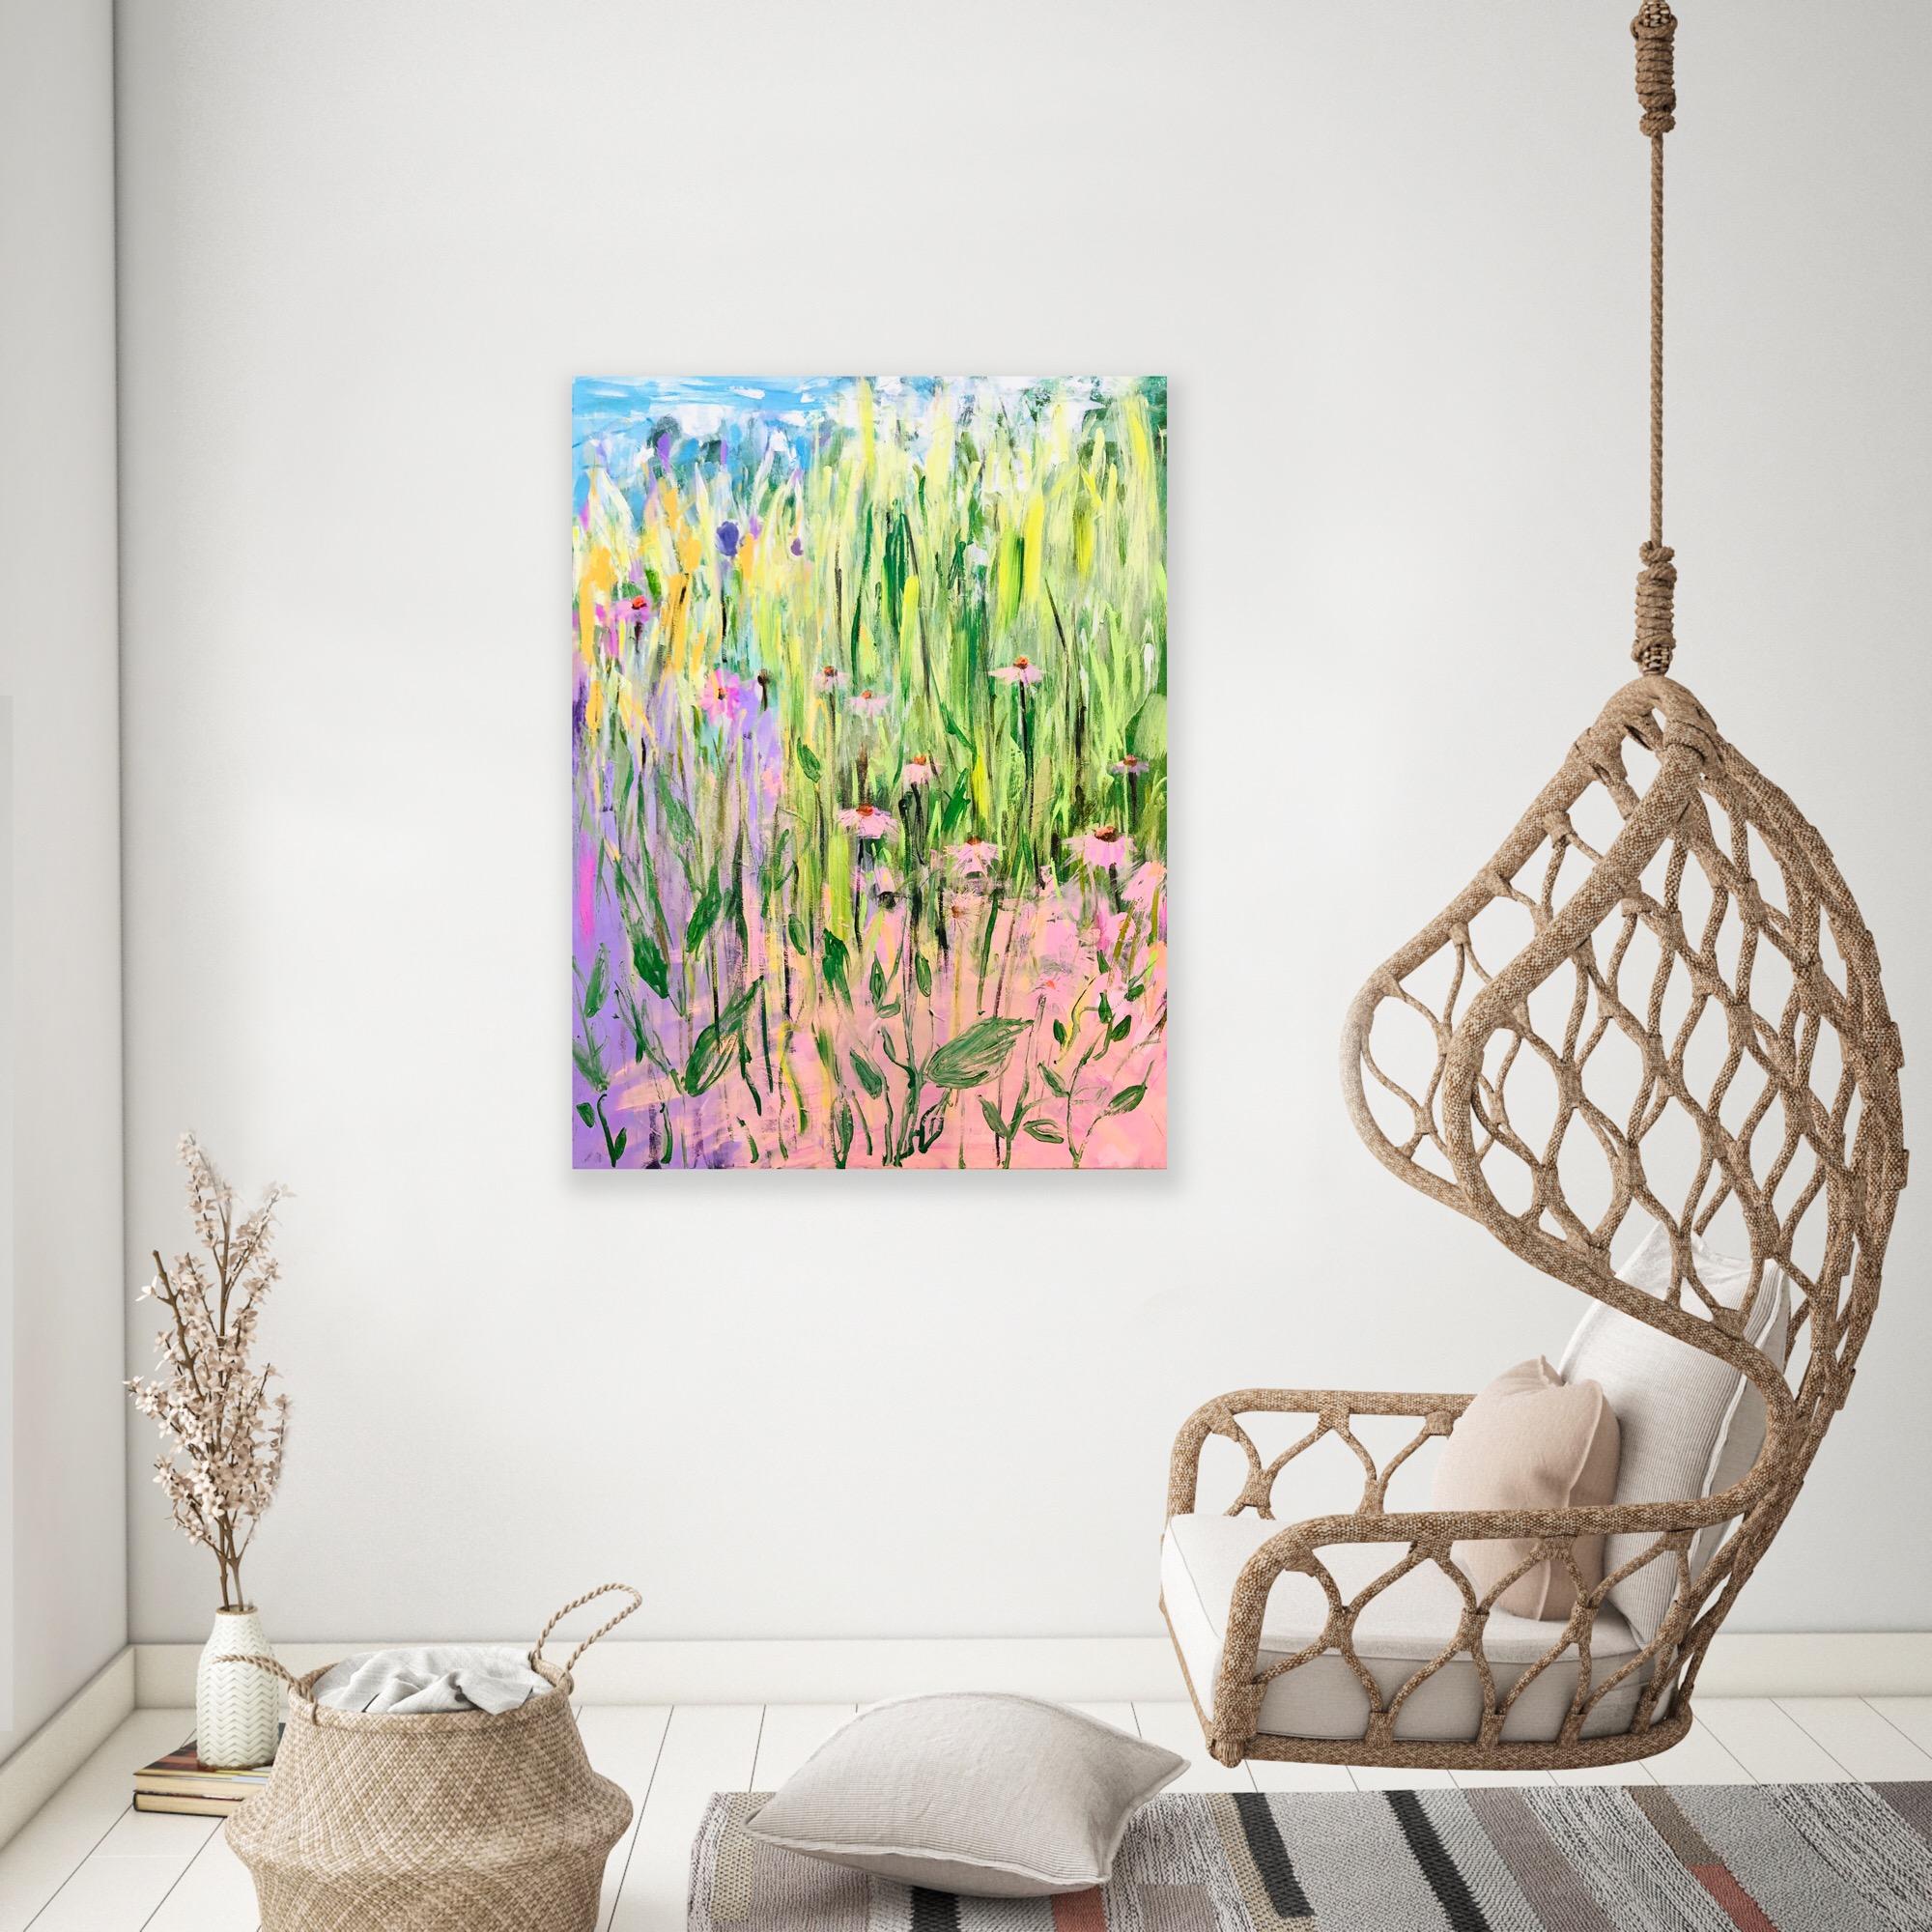 Abstract florals [2022]
original and hand signed by the artist 

Acrylic on canvas

Image size: H:101 cm x W:76 cm

Complete Size of Unframed Work: H:101 cm x W:76 cm x D:1.5cm

Sold Unframed

Please note that insitu images are purely an indication